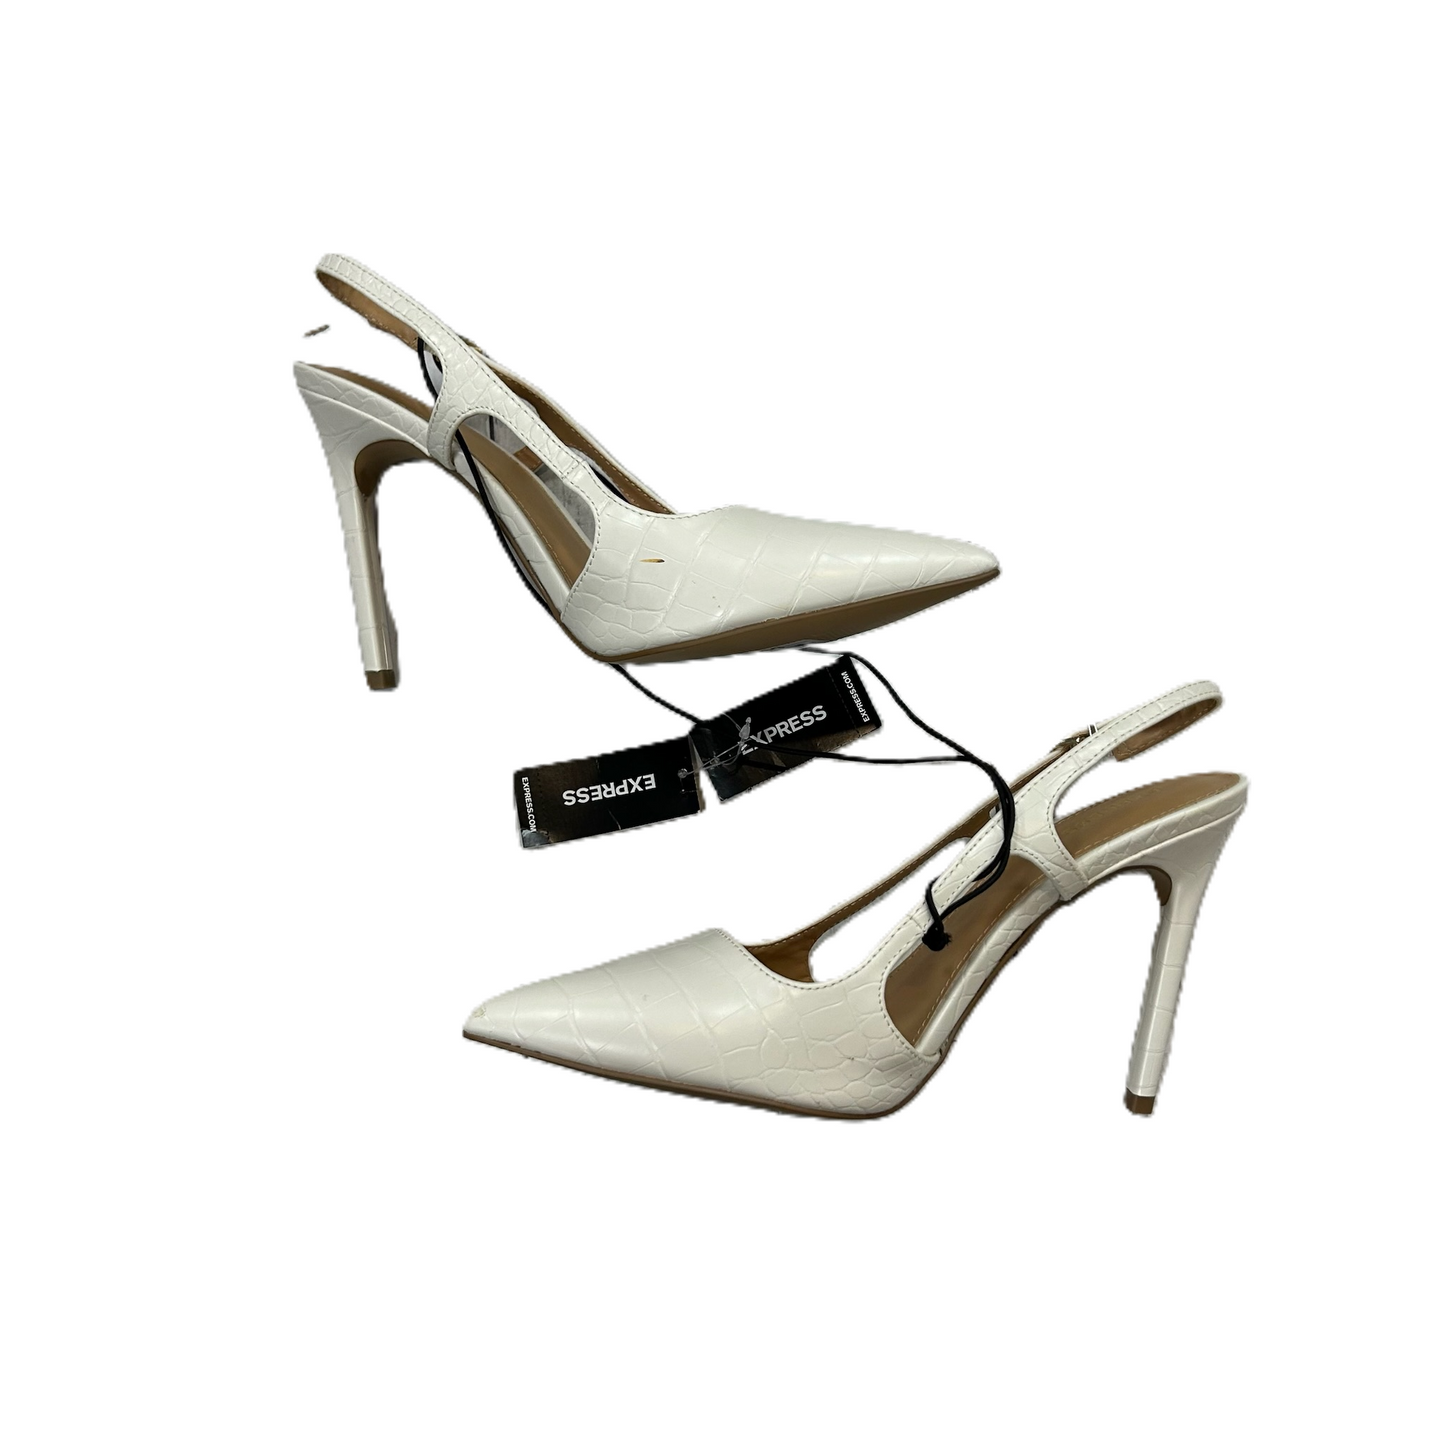 White Shoes Heels Stiletto By Express, Size: 10